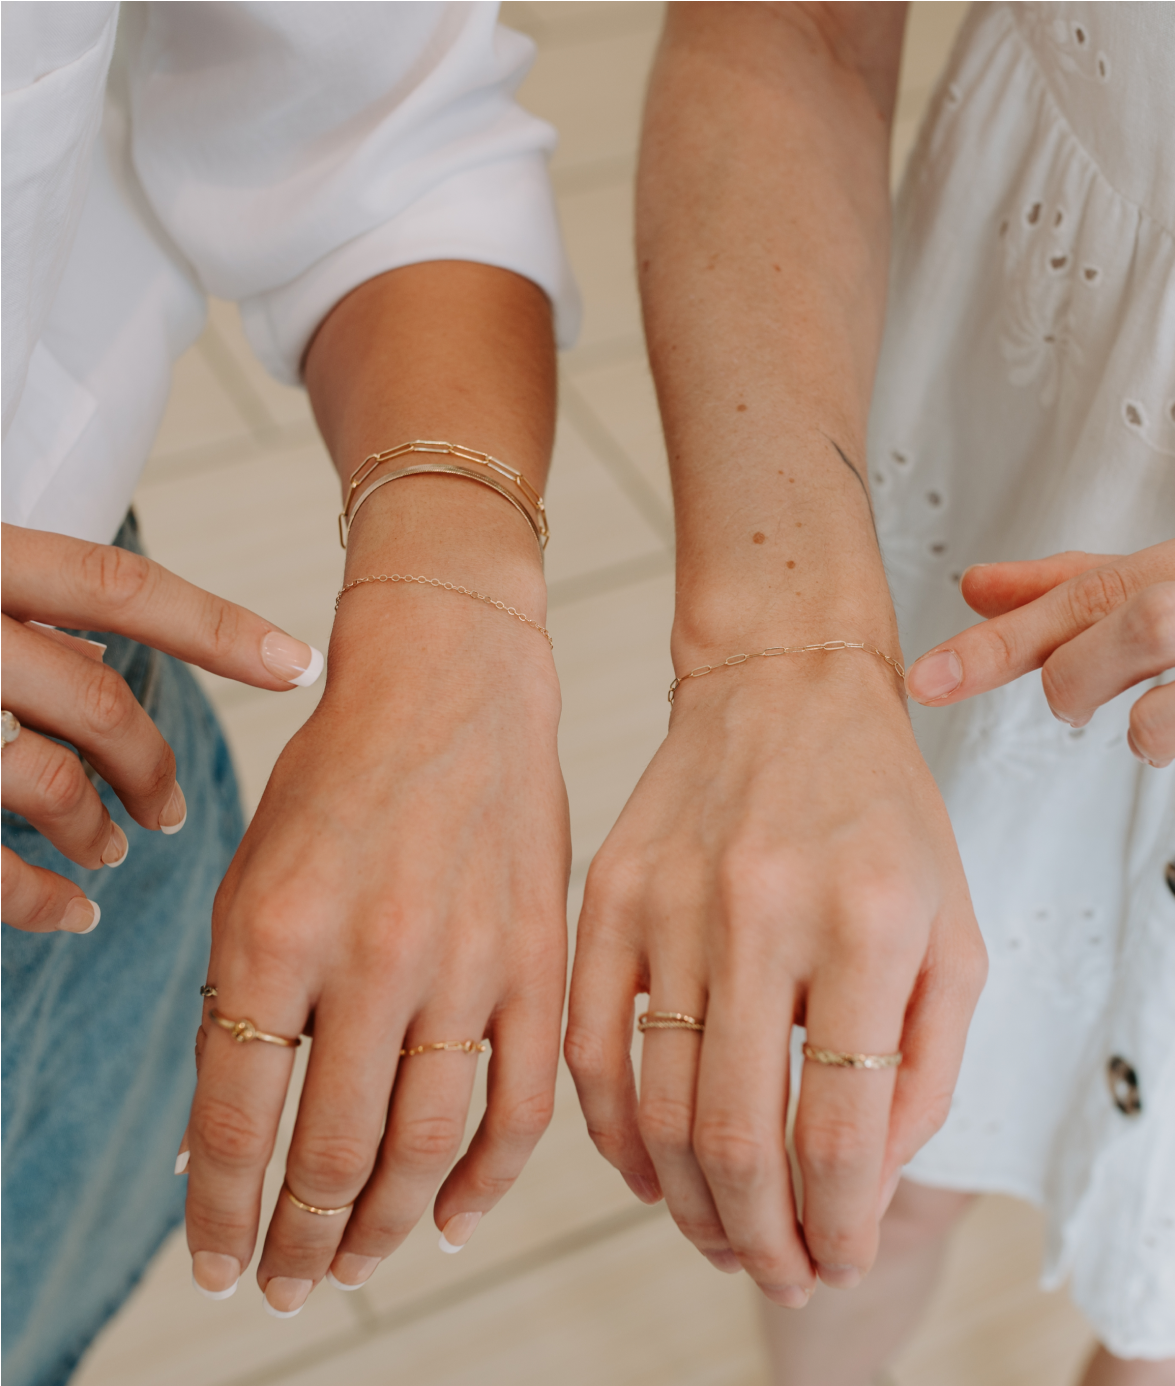 Permanent Jewelry Is Here to Stay - Jewelry Connoisseur